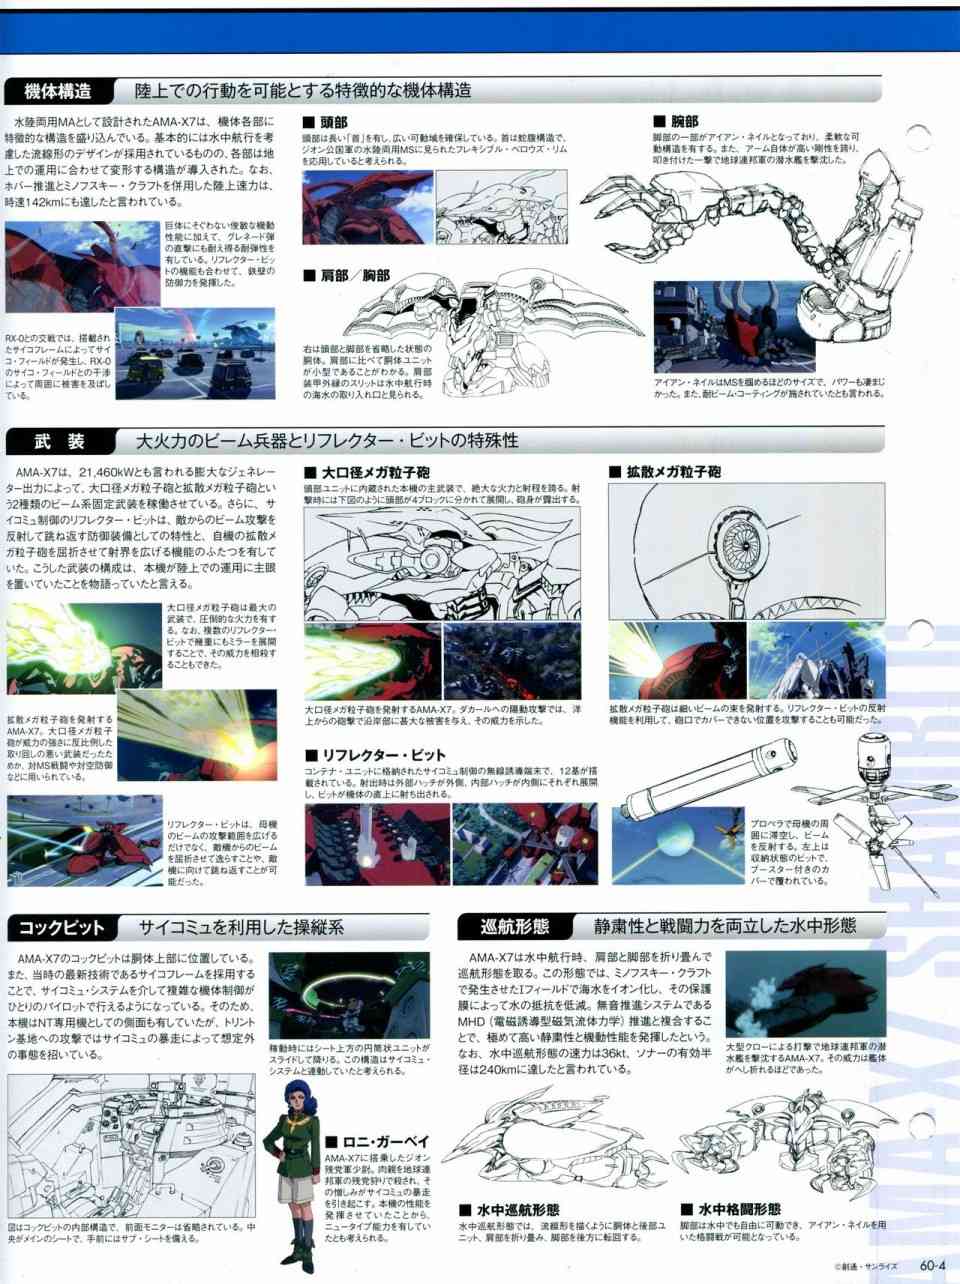 The Official Gundam Perfect File  - 第56-64話(3/7) - 6